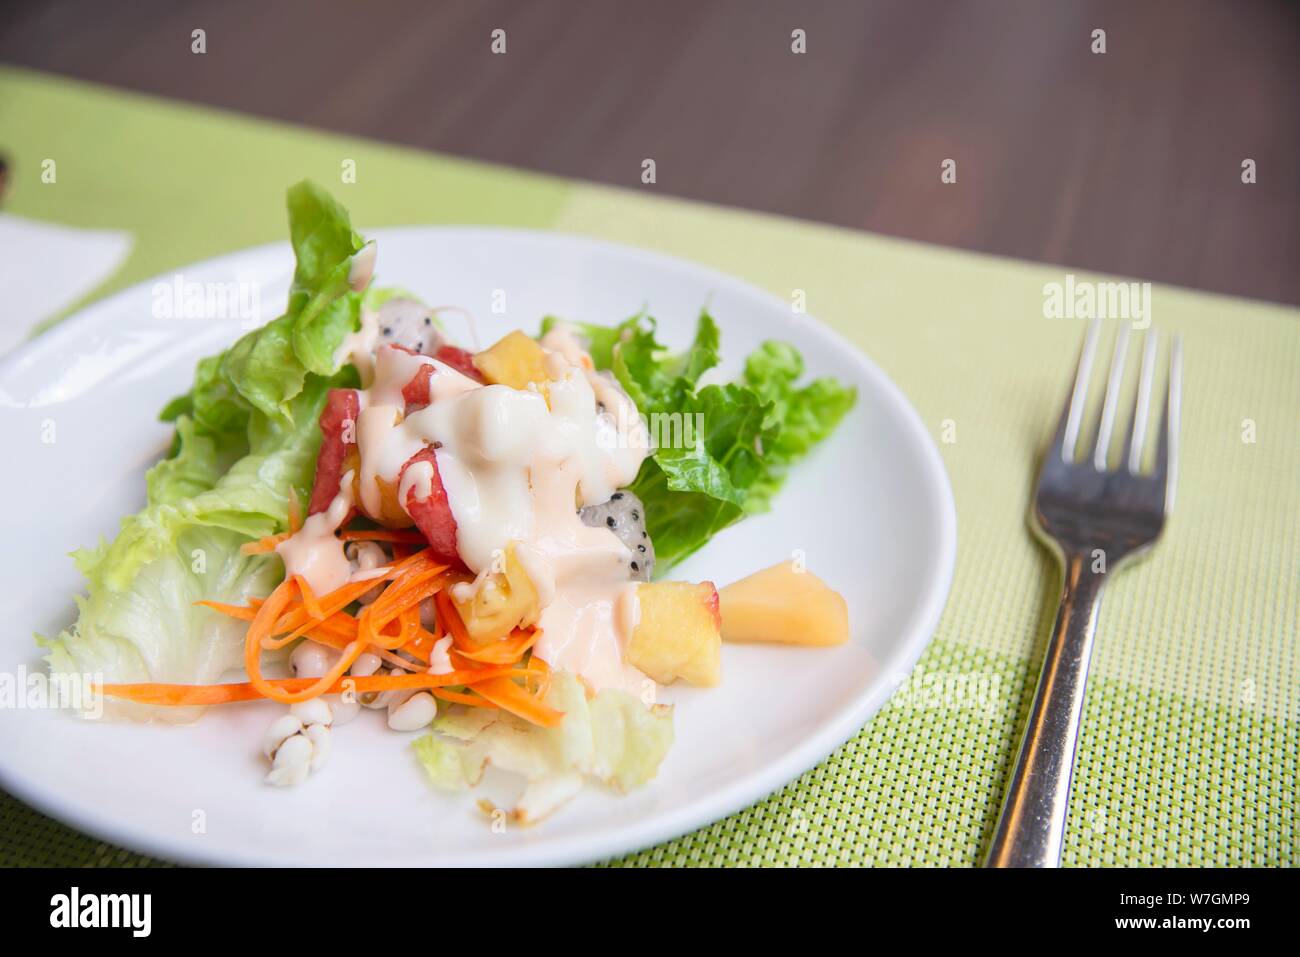 Fresh vegetable healthy salad on white plate ready for eating - fresh healthy food concept Stock Photo